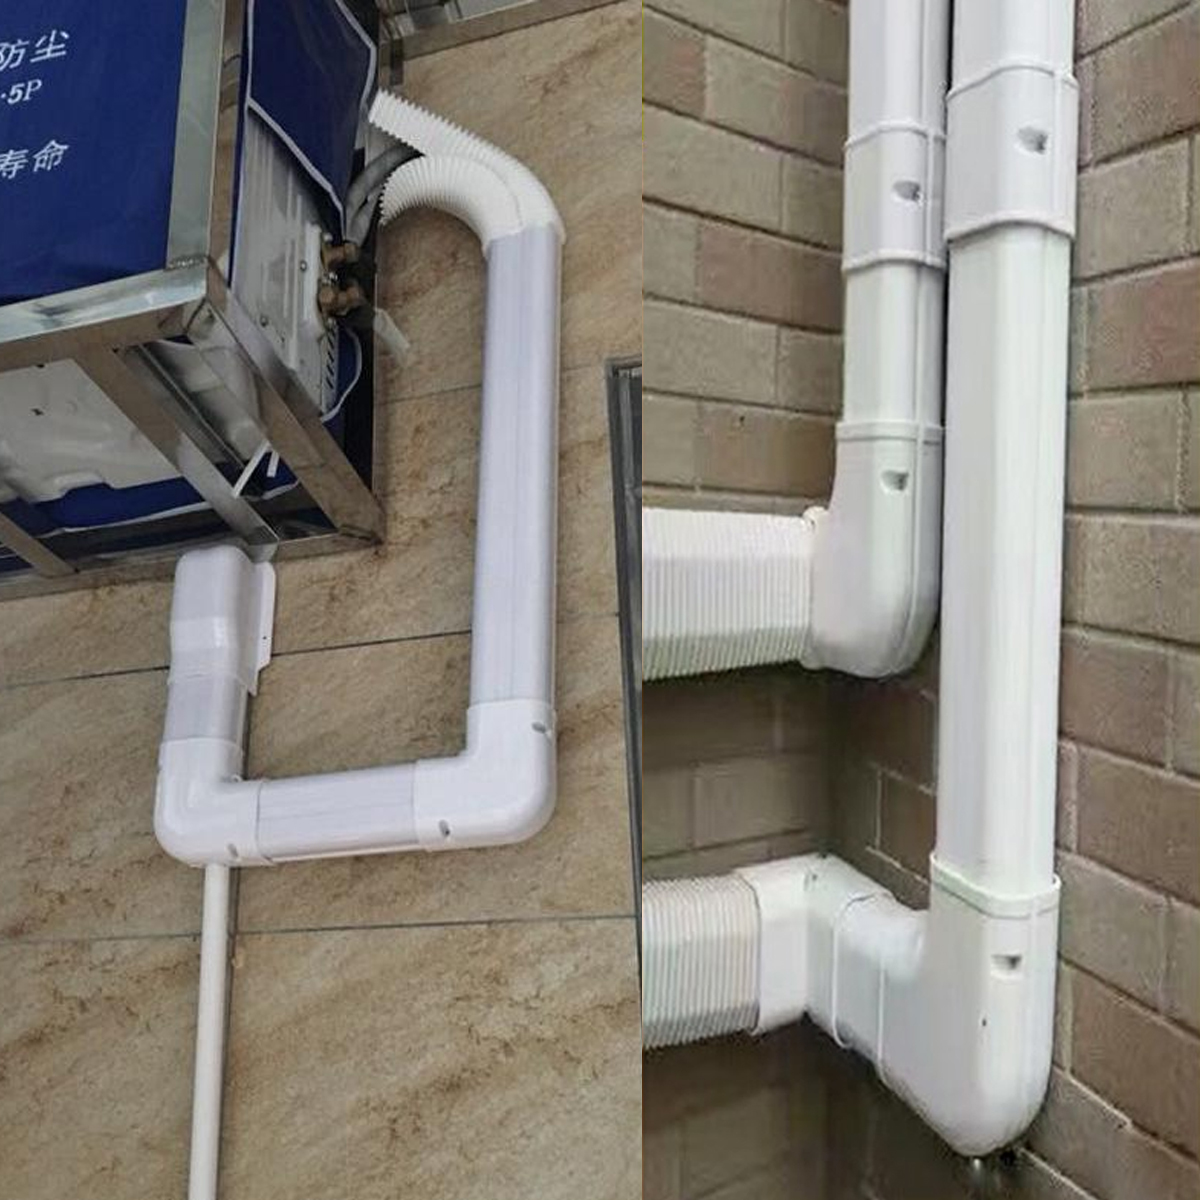 Air-Conditioning-PVC-Decorative-Tube-Flat-Bend-Soft-Hose-Duct-Slot-Pipes-System-Pipes-Fittings-1544953-6